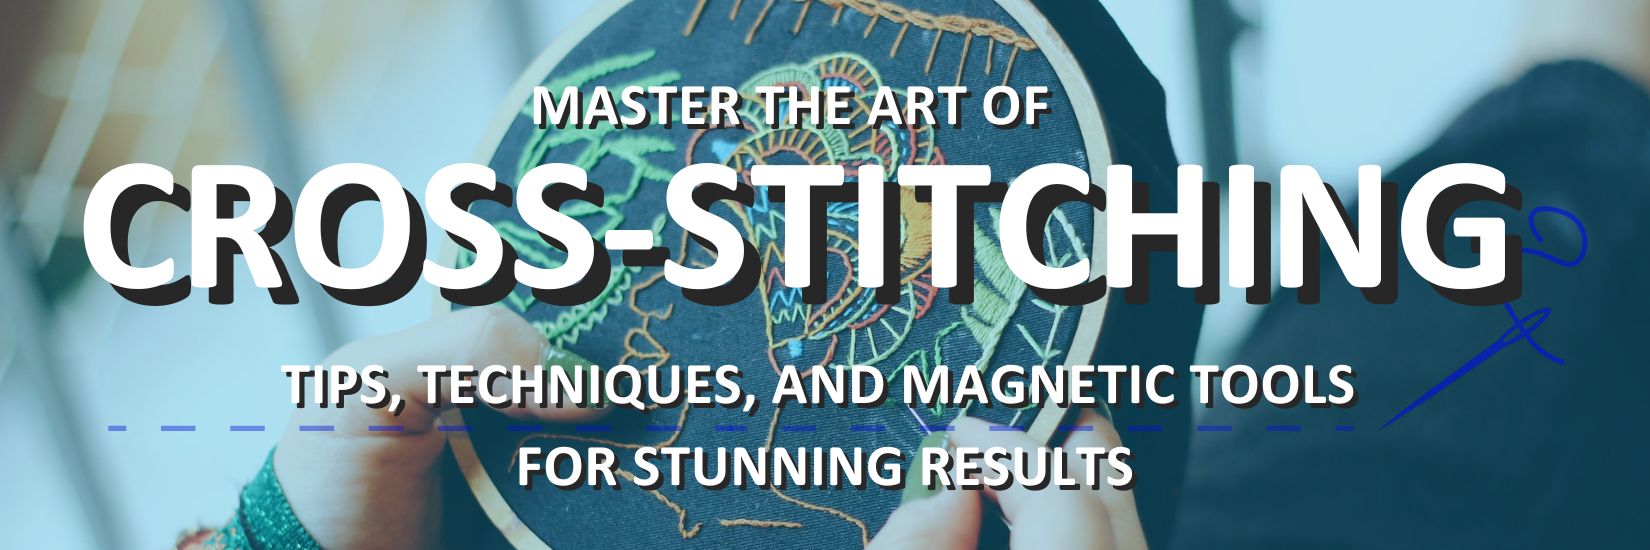 Master the Art of Cross-Stitching: Tips, Techniques, and Magnetic Tools for Stunning Results